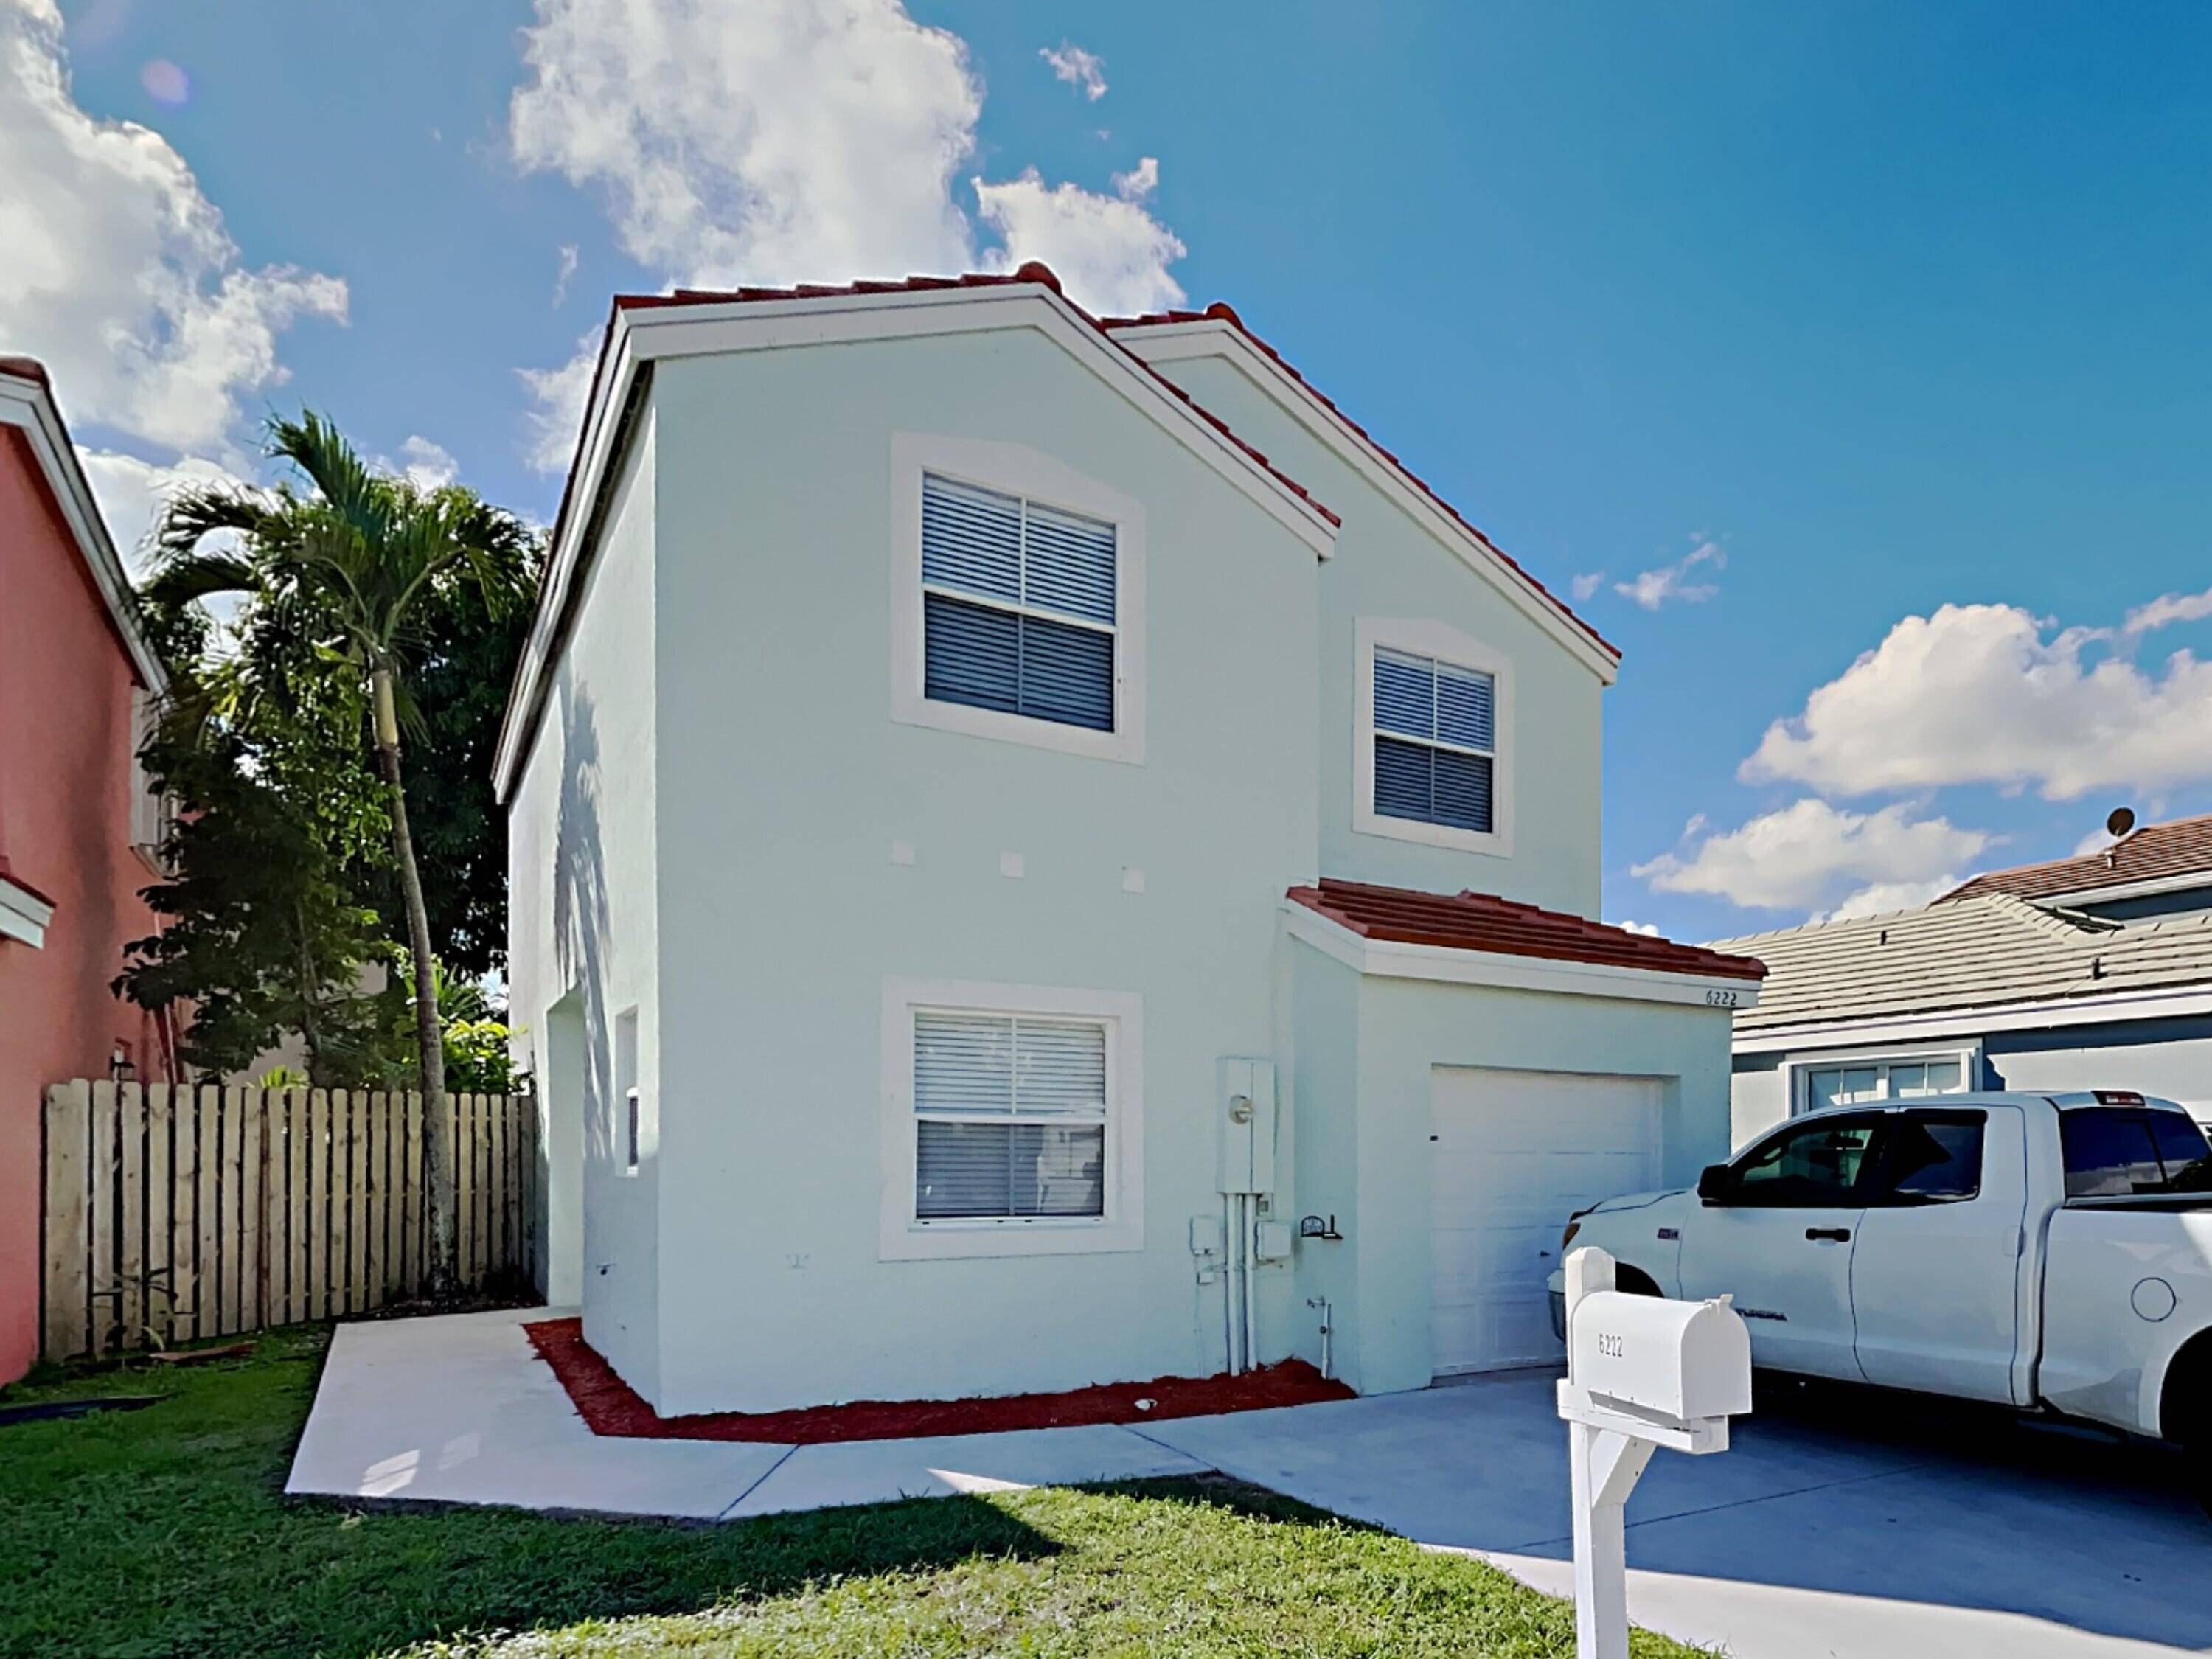 This 3 bedroom, 2. 0 bathroom home offers 1757 sq.